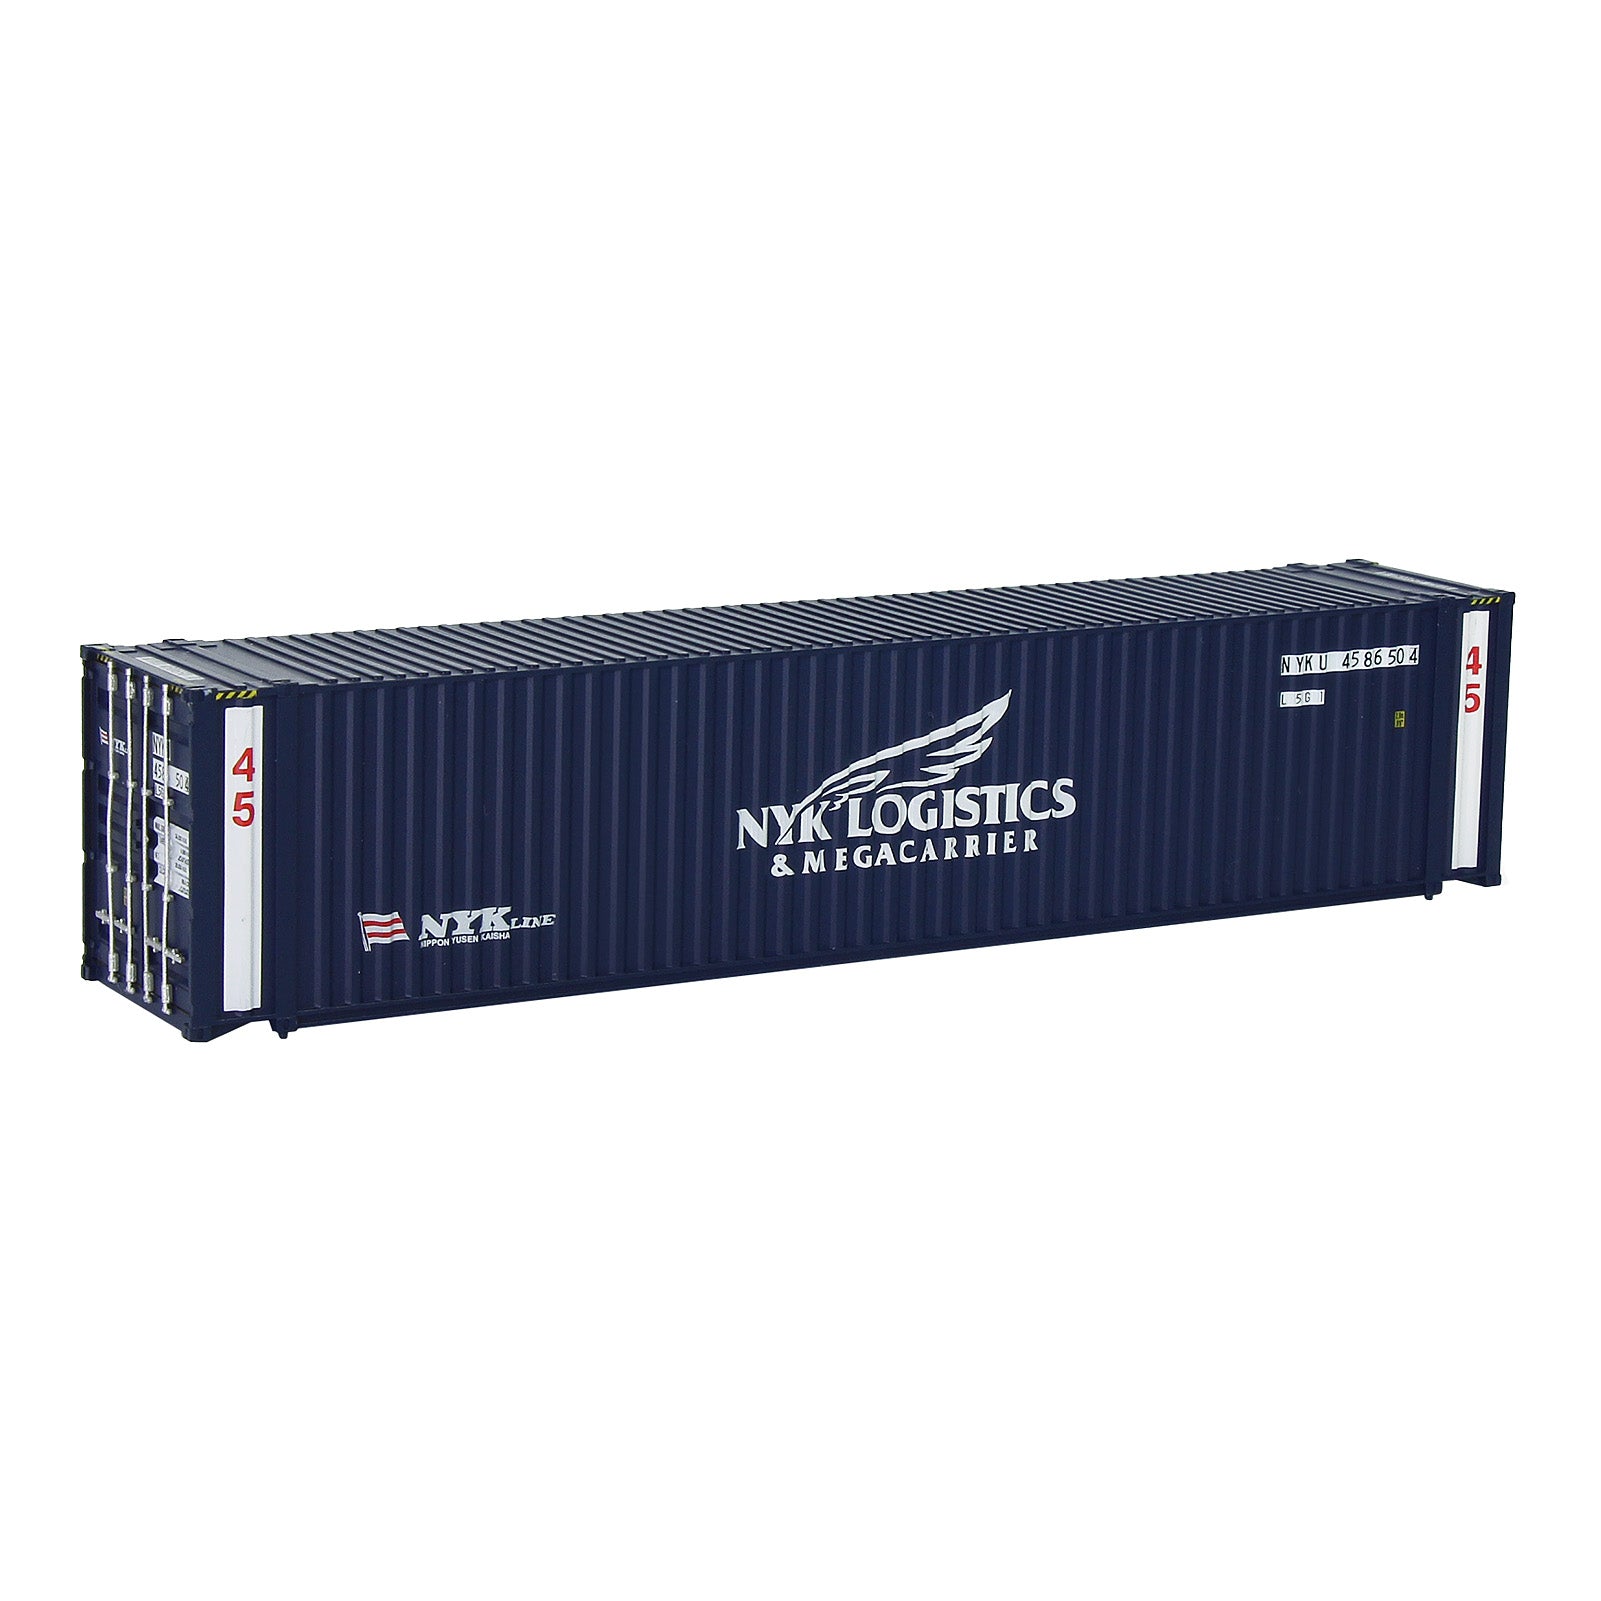 C8745 1pc HO Scale 1:87 Model Shipping Container 45ft Cargo Box